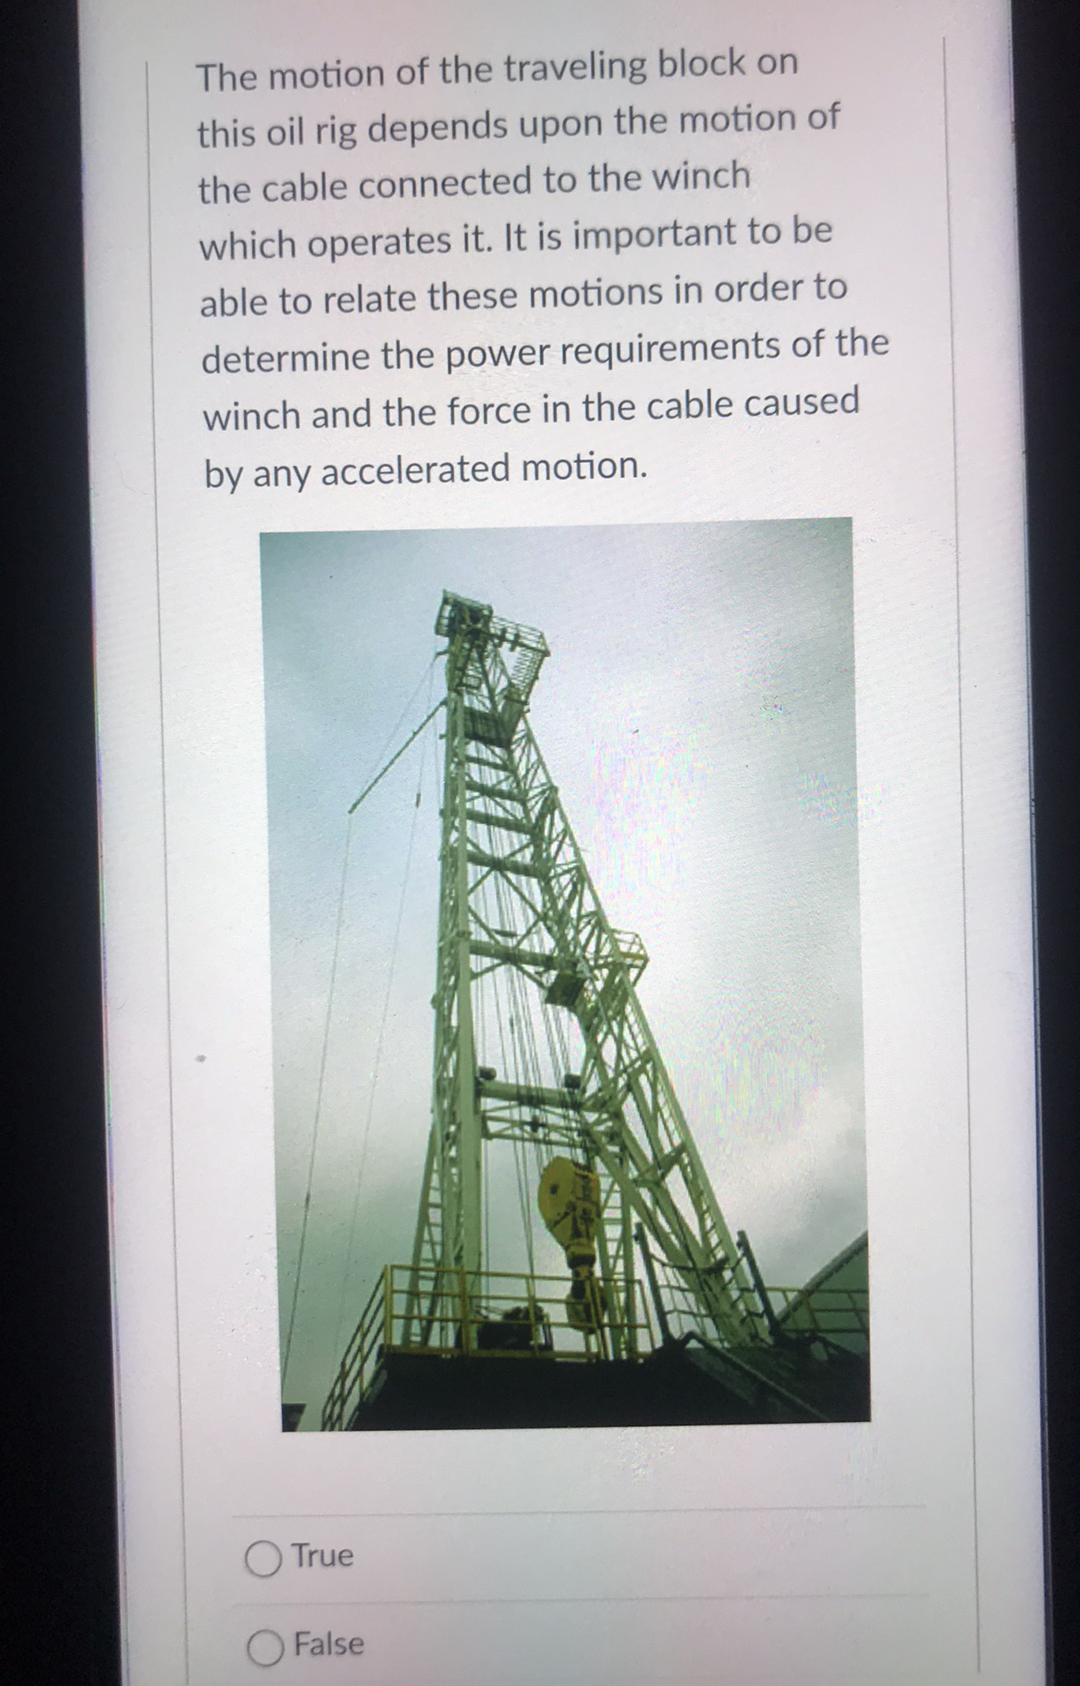 The motion of the traveling block on
this oil rig depends upon the motion of
the cable connected to the winch
which operates it. It is important to be
able to relate these motions in order to
determine the power requirements of the
winch and the force in the cable caused
by any accelerated motion.
O True
O False
